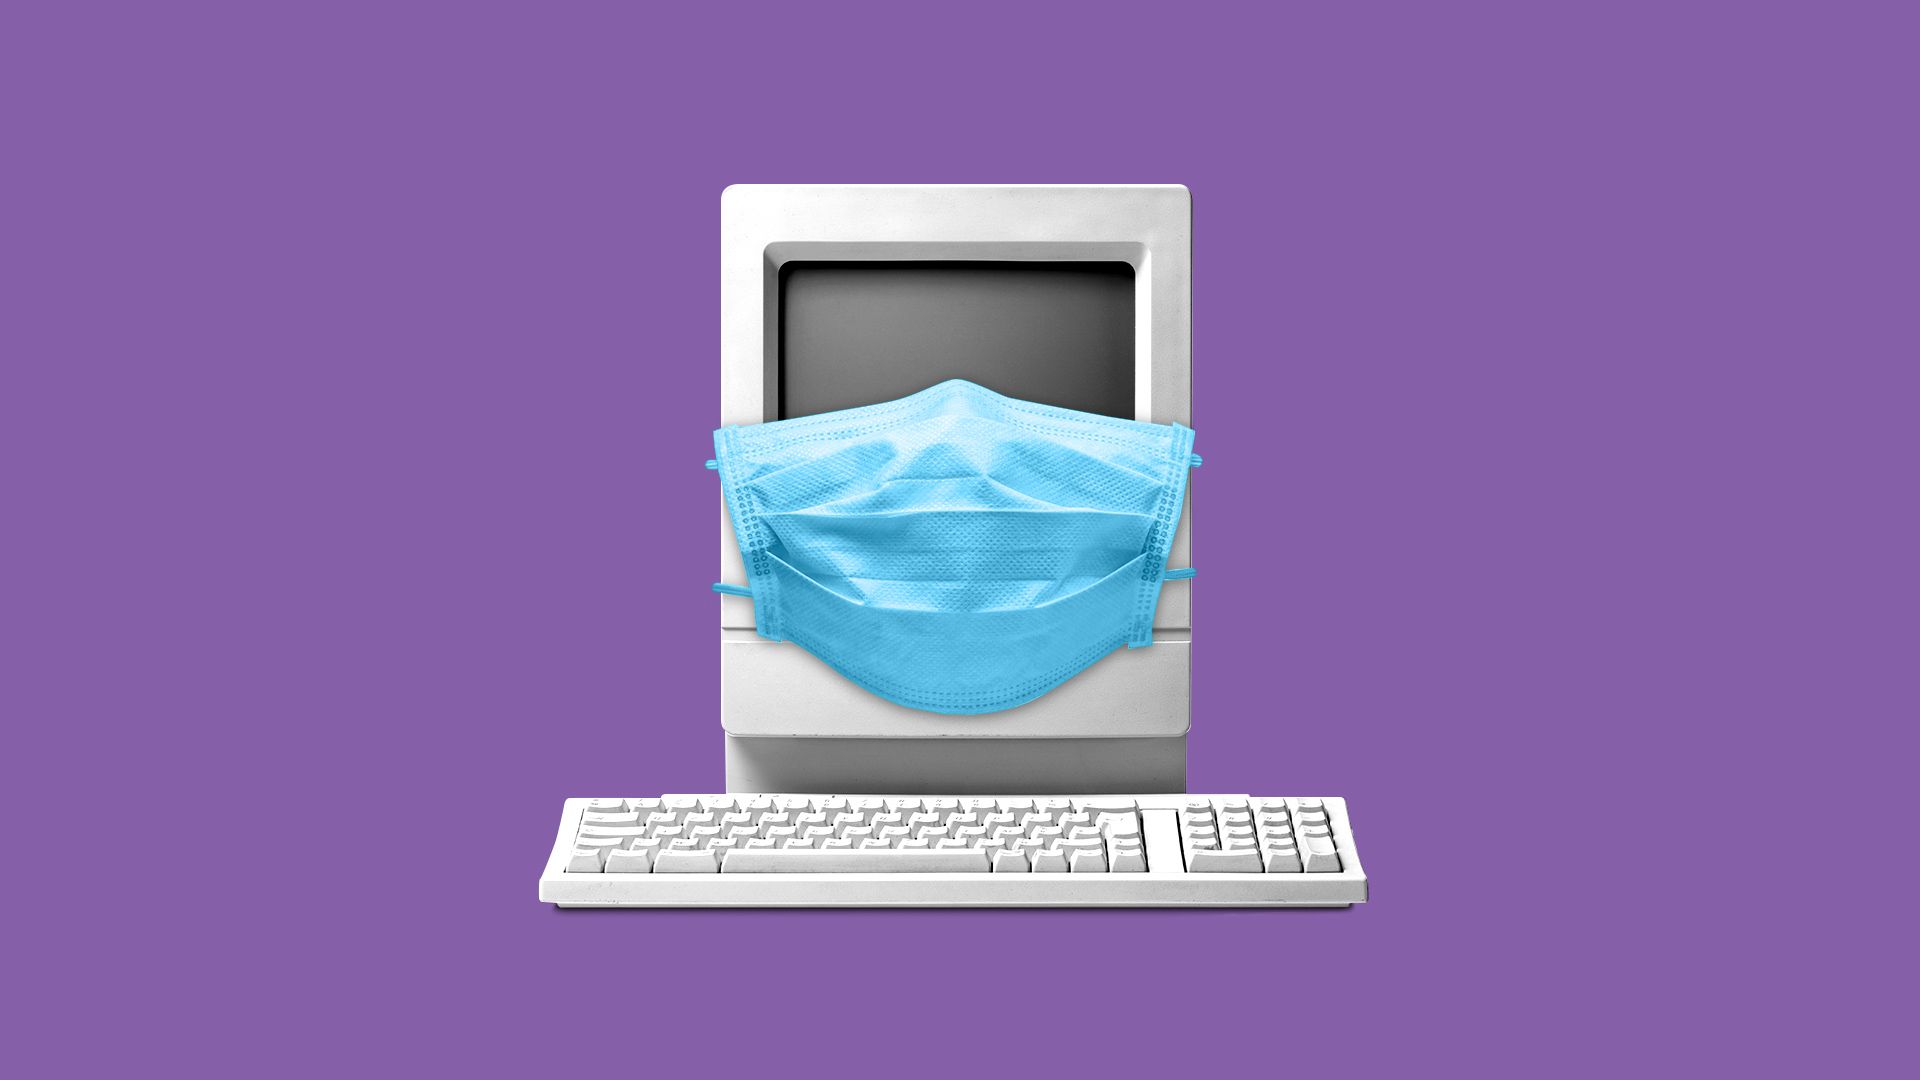 An illustration of a computer with a blue surgical mask covering its "mouth"